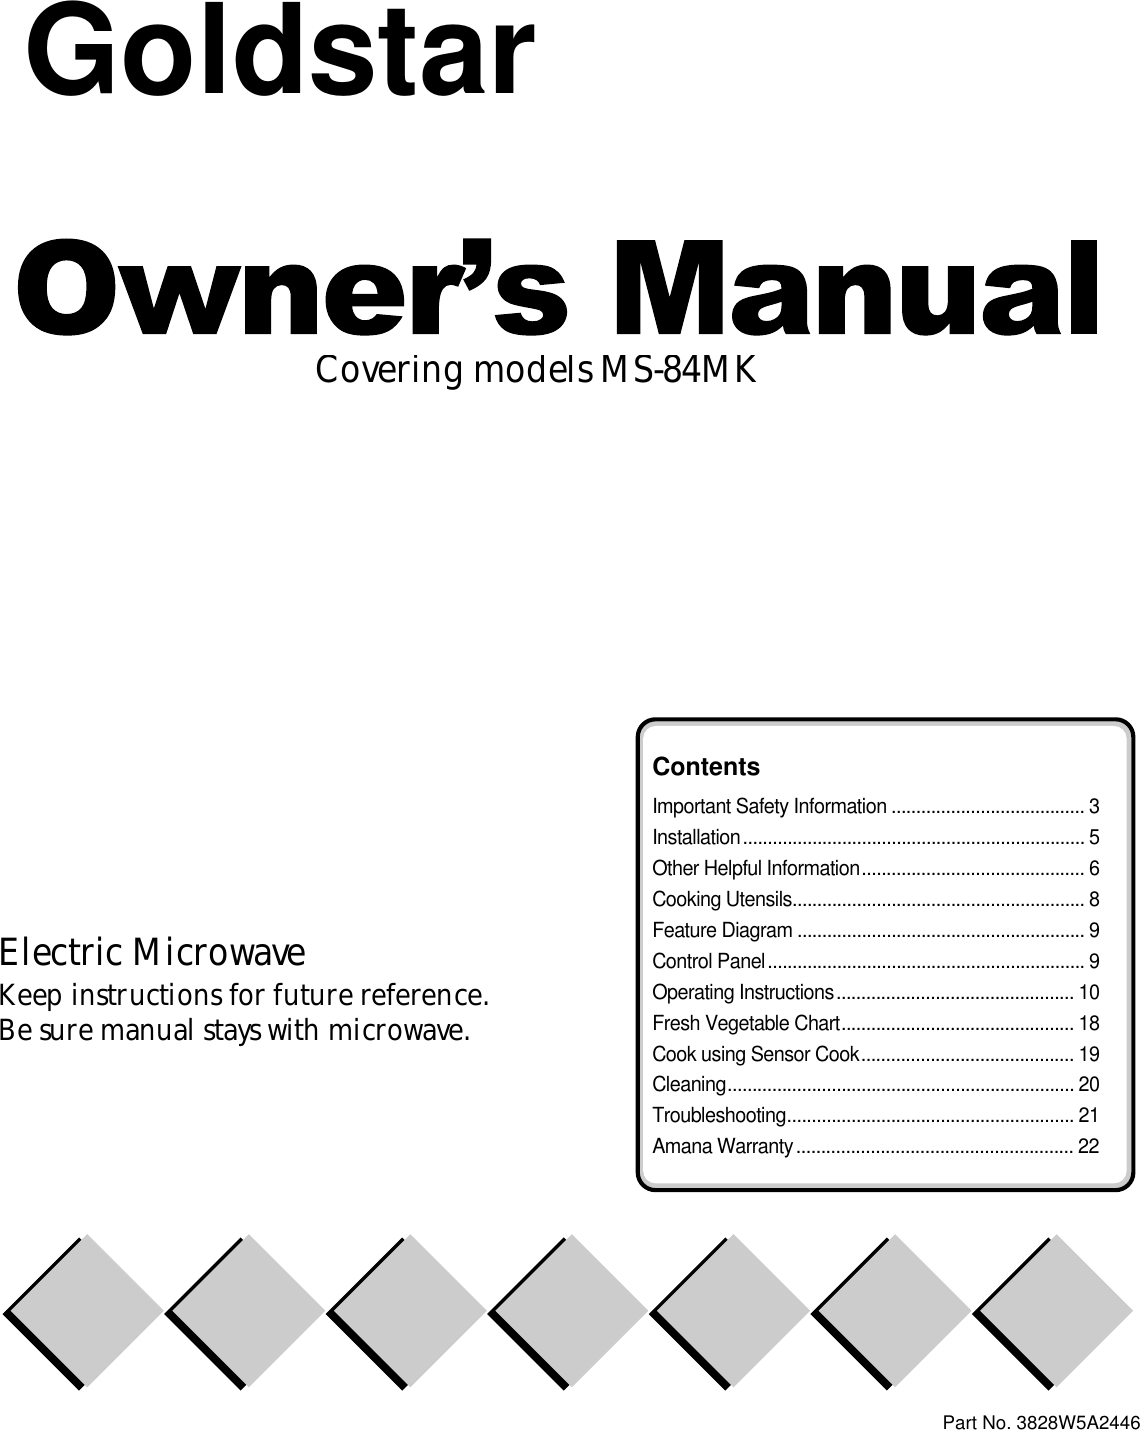 Covering models MS-84MKElectric MicrowaveKeep instructions for future reference.Be sure manual stays with microwave.Part No. 3828W5A2446ContentsImportant Safety Information ....................................... 3Installation..................................................................... 5Other Helpful Information............................................. 6Cooking Utensils........................................................... 8Feature Diagram .......................................................... 9Control Panel................................................................ 9Operating Instructions................................................ 10Fresh Vegetable Chart............................................... 18Cook using Sensor Cook........................................... 19Cleaning...................................................................... 20Troubleshooting.......................................................... 21Amana Warranty........................................................ 22Goldstar